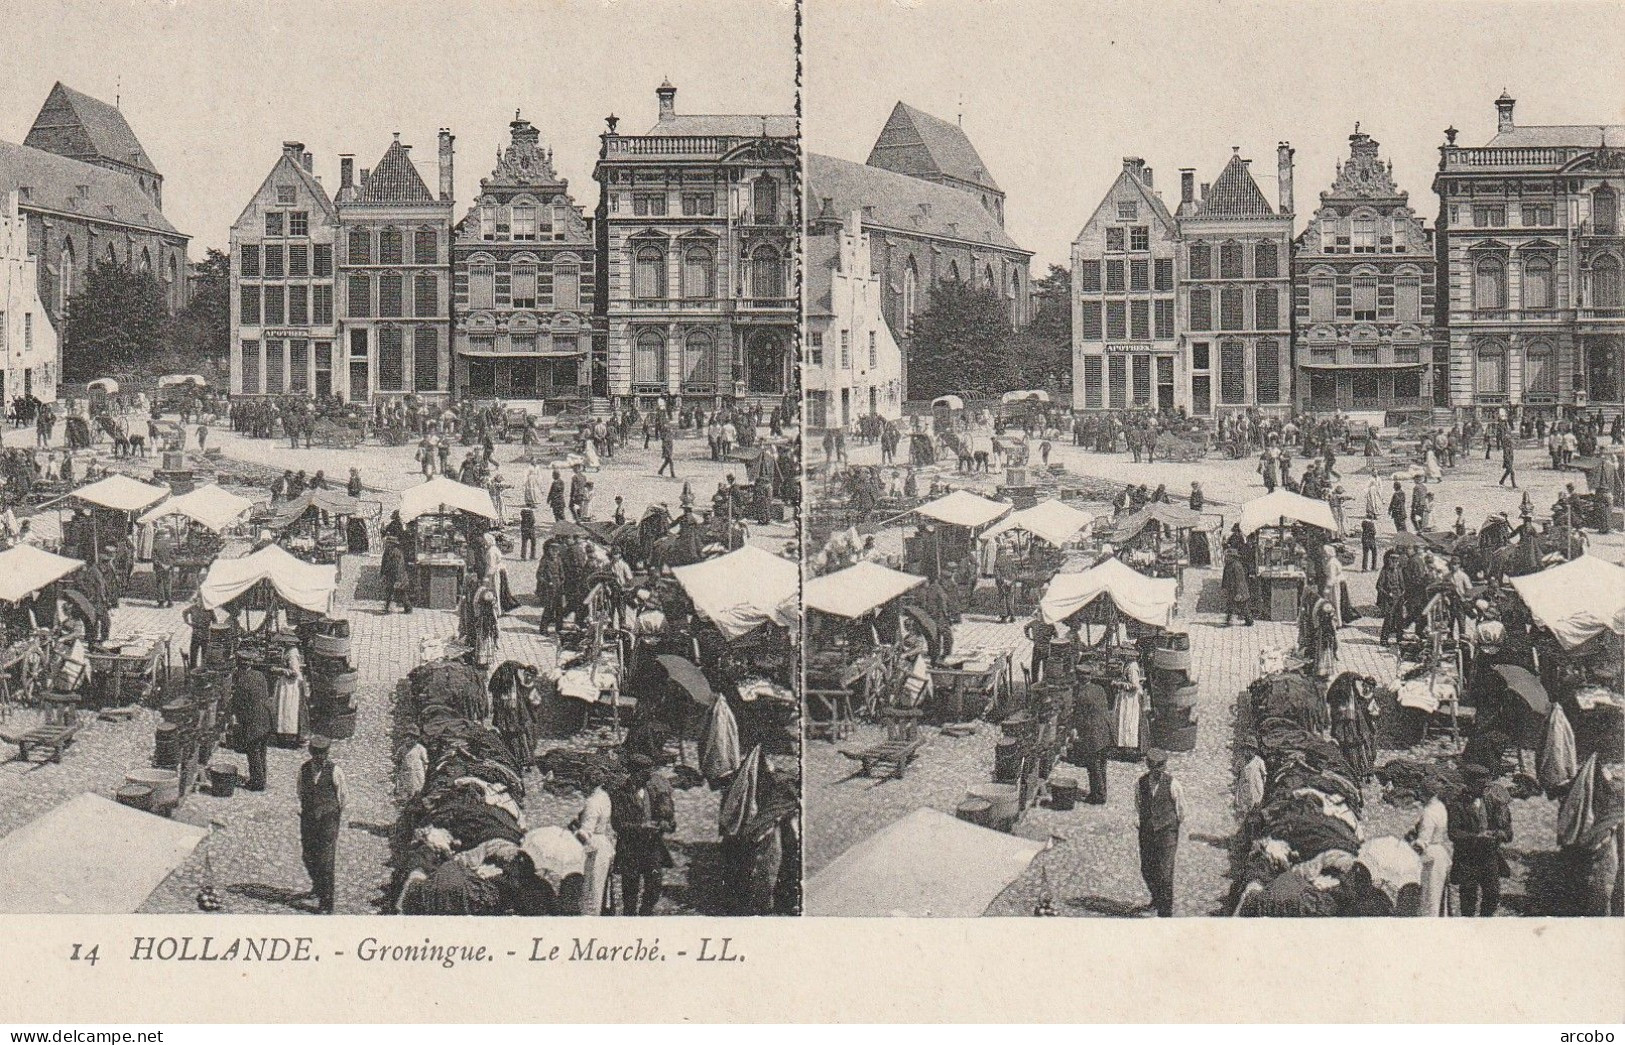 Groningen Le Marché - Stereoscope Cards